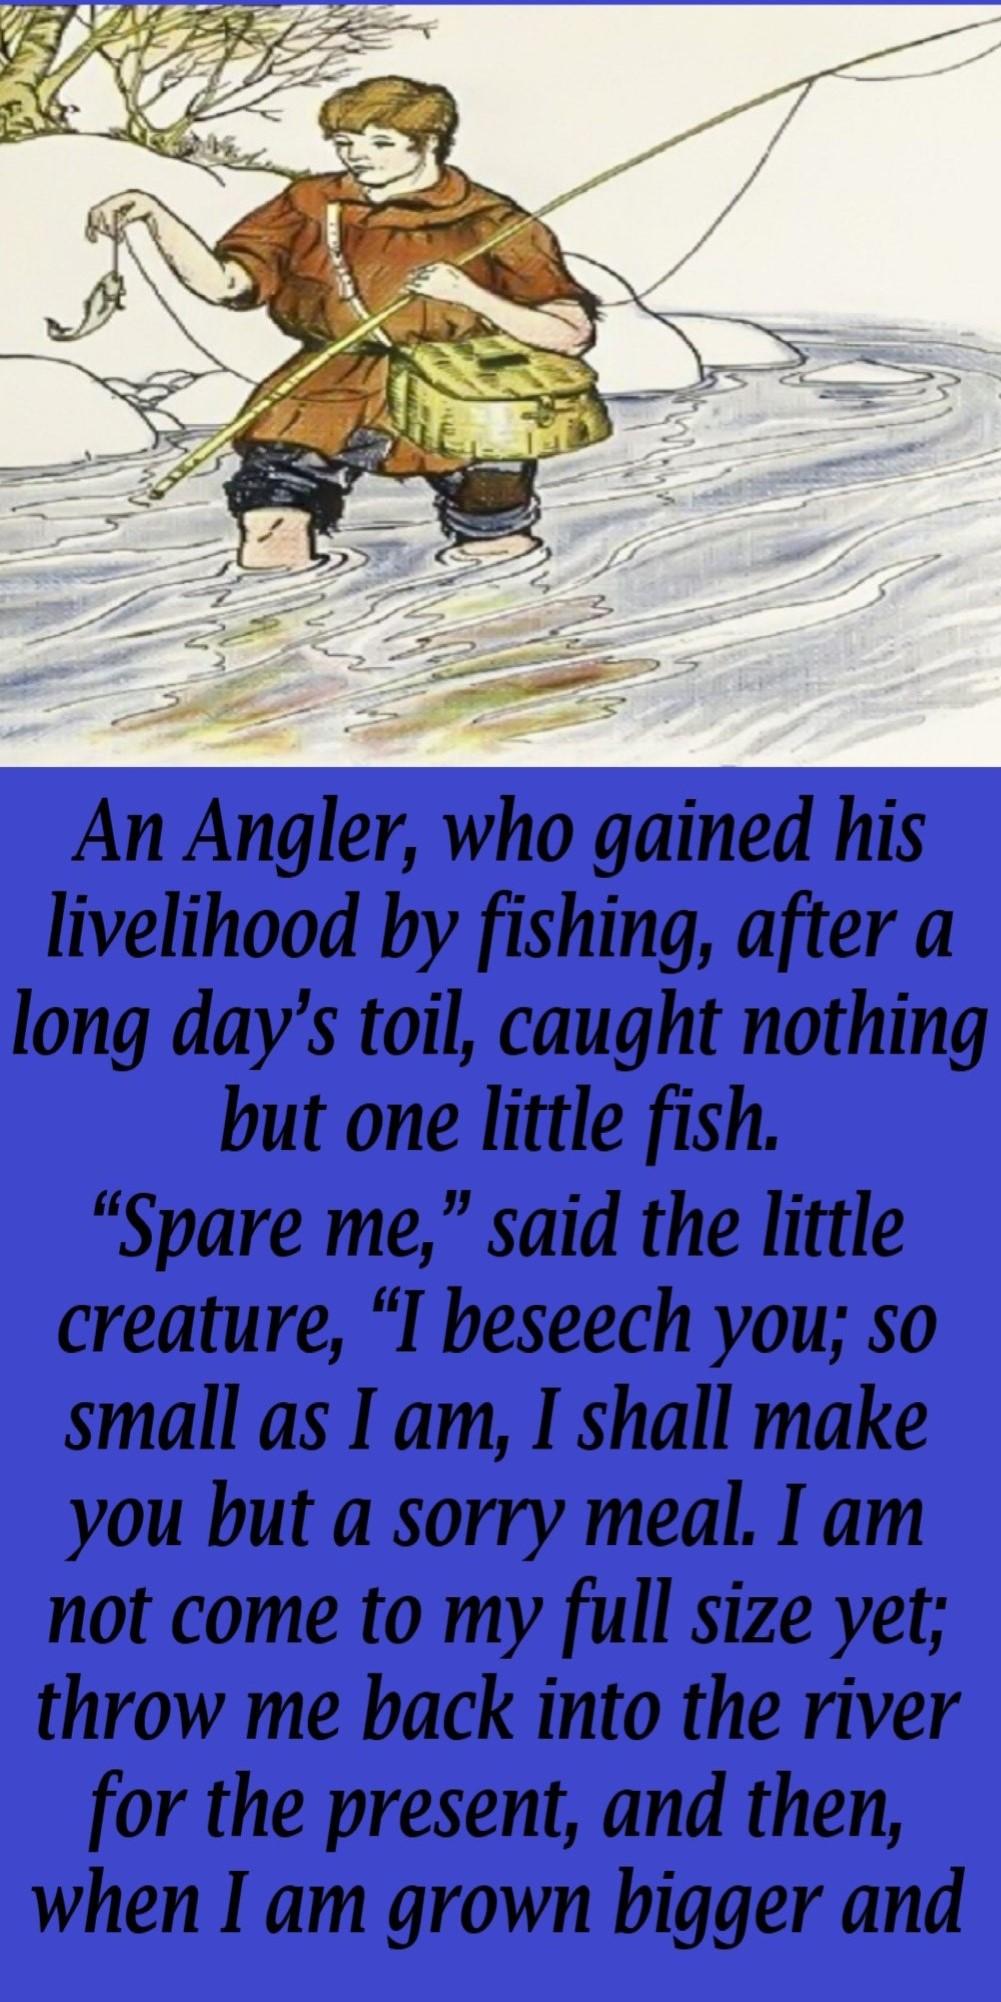 1The Angler And The Little FIsh -